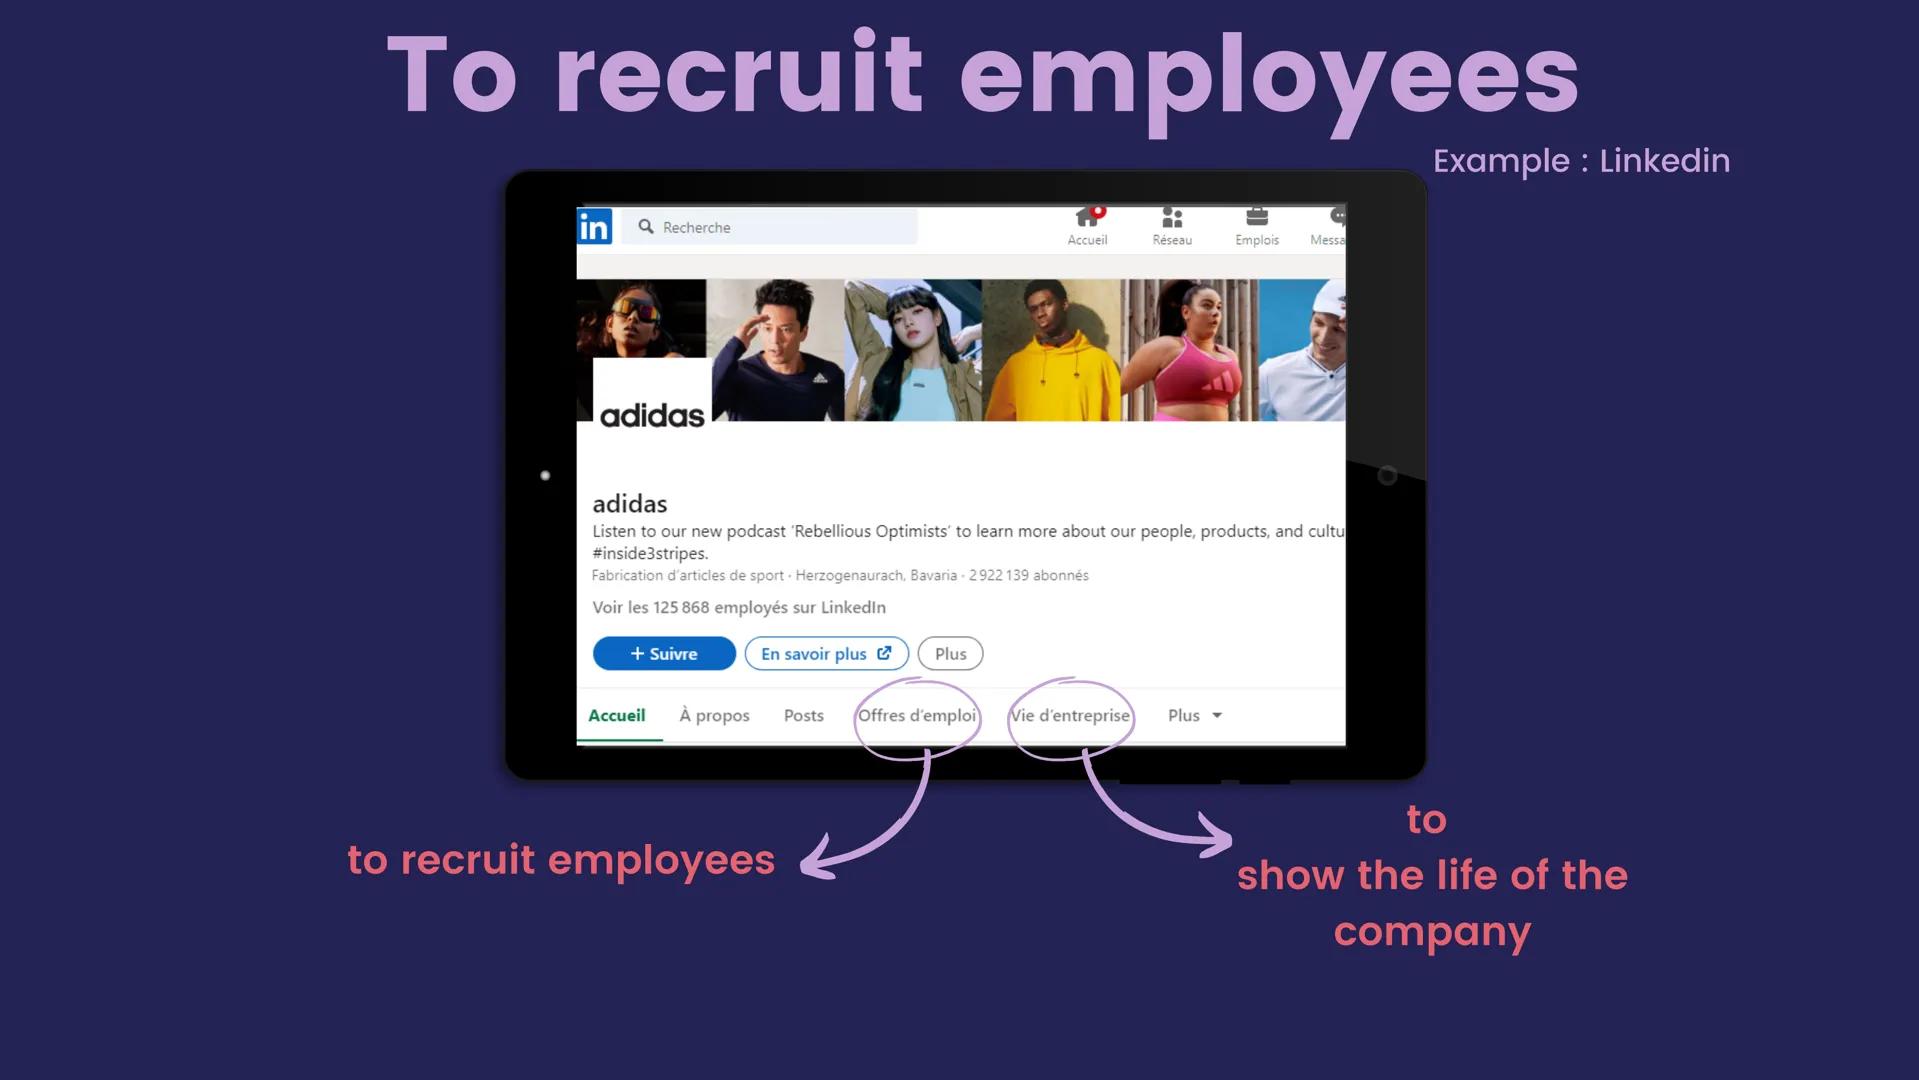 How do
employeurs use
social media for
their businesses ?
Their use of social networks and the risks
for companies To recruit employees
in
a